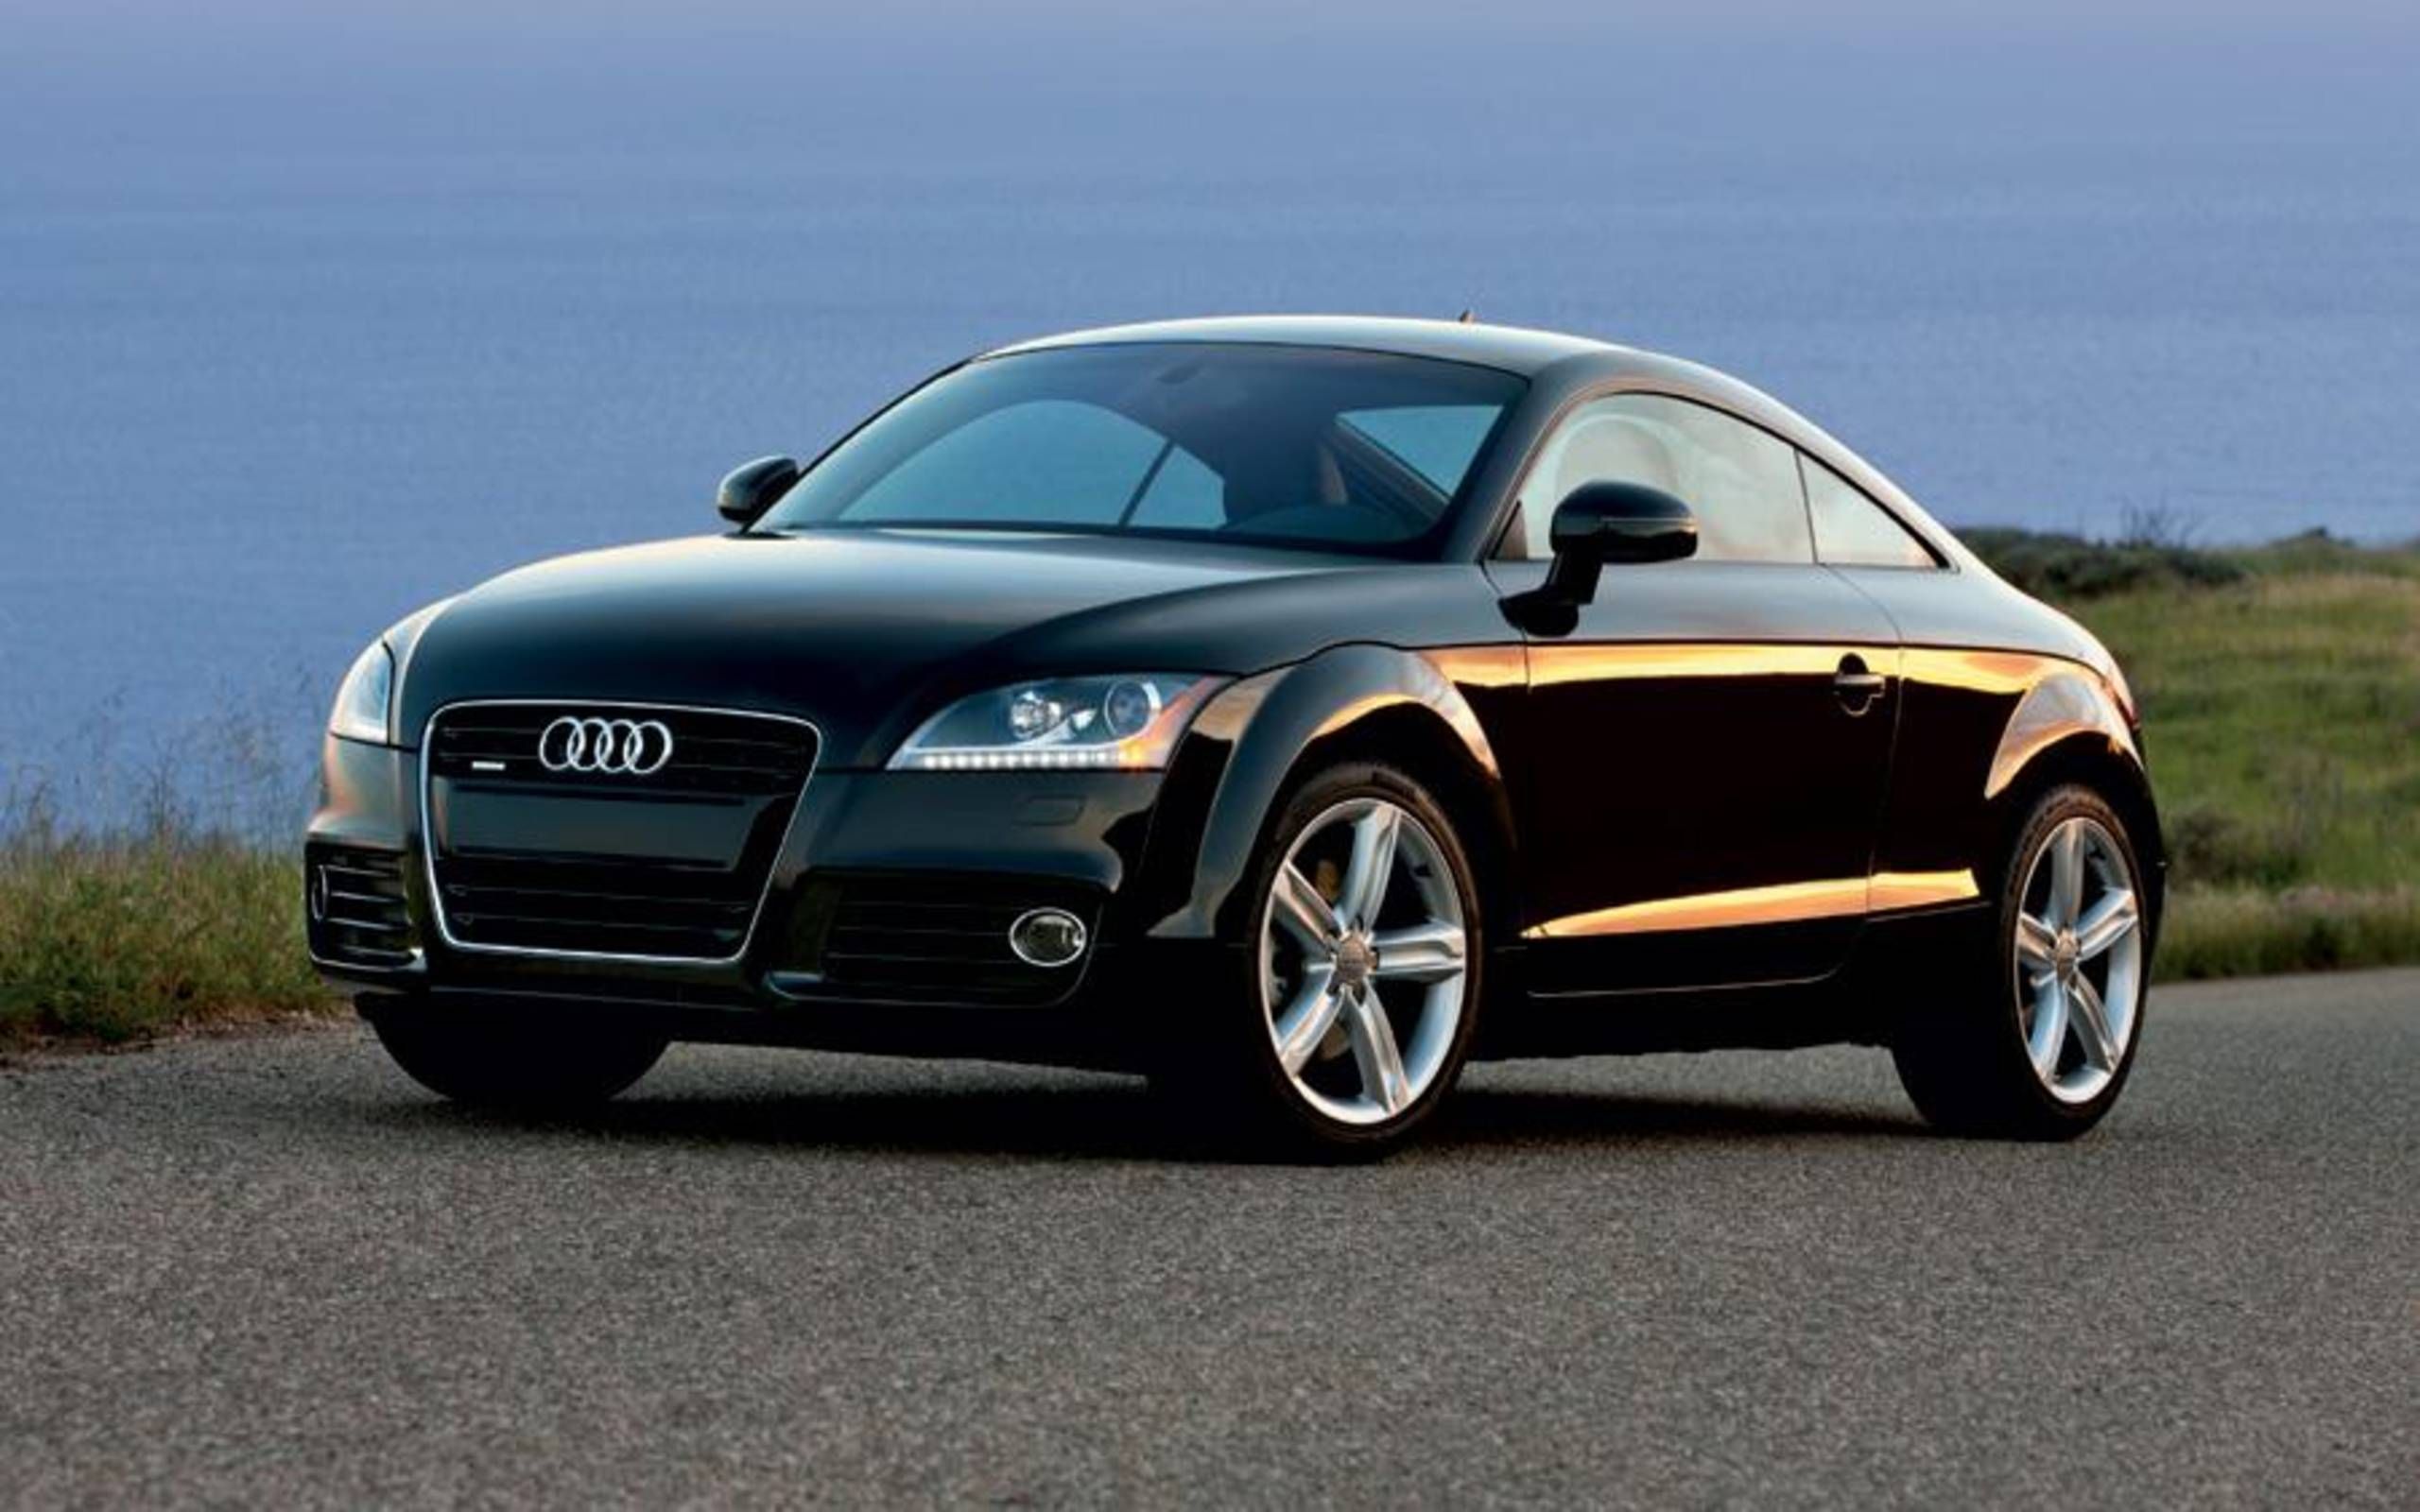 2012 Audi TT 2.0 TFSI Prestige Coupe review notes: It's the base